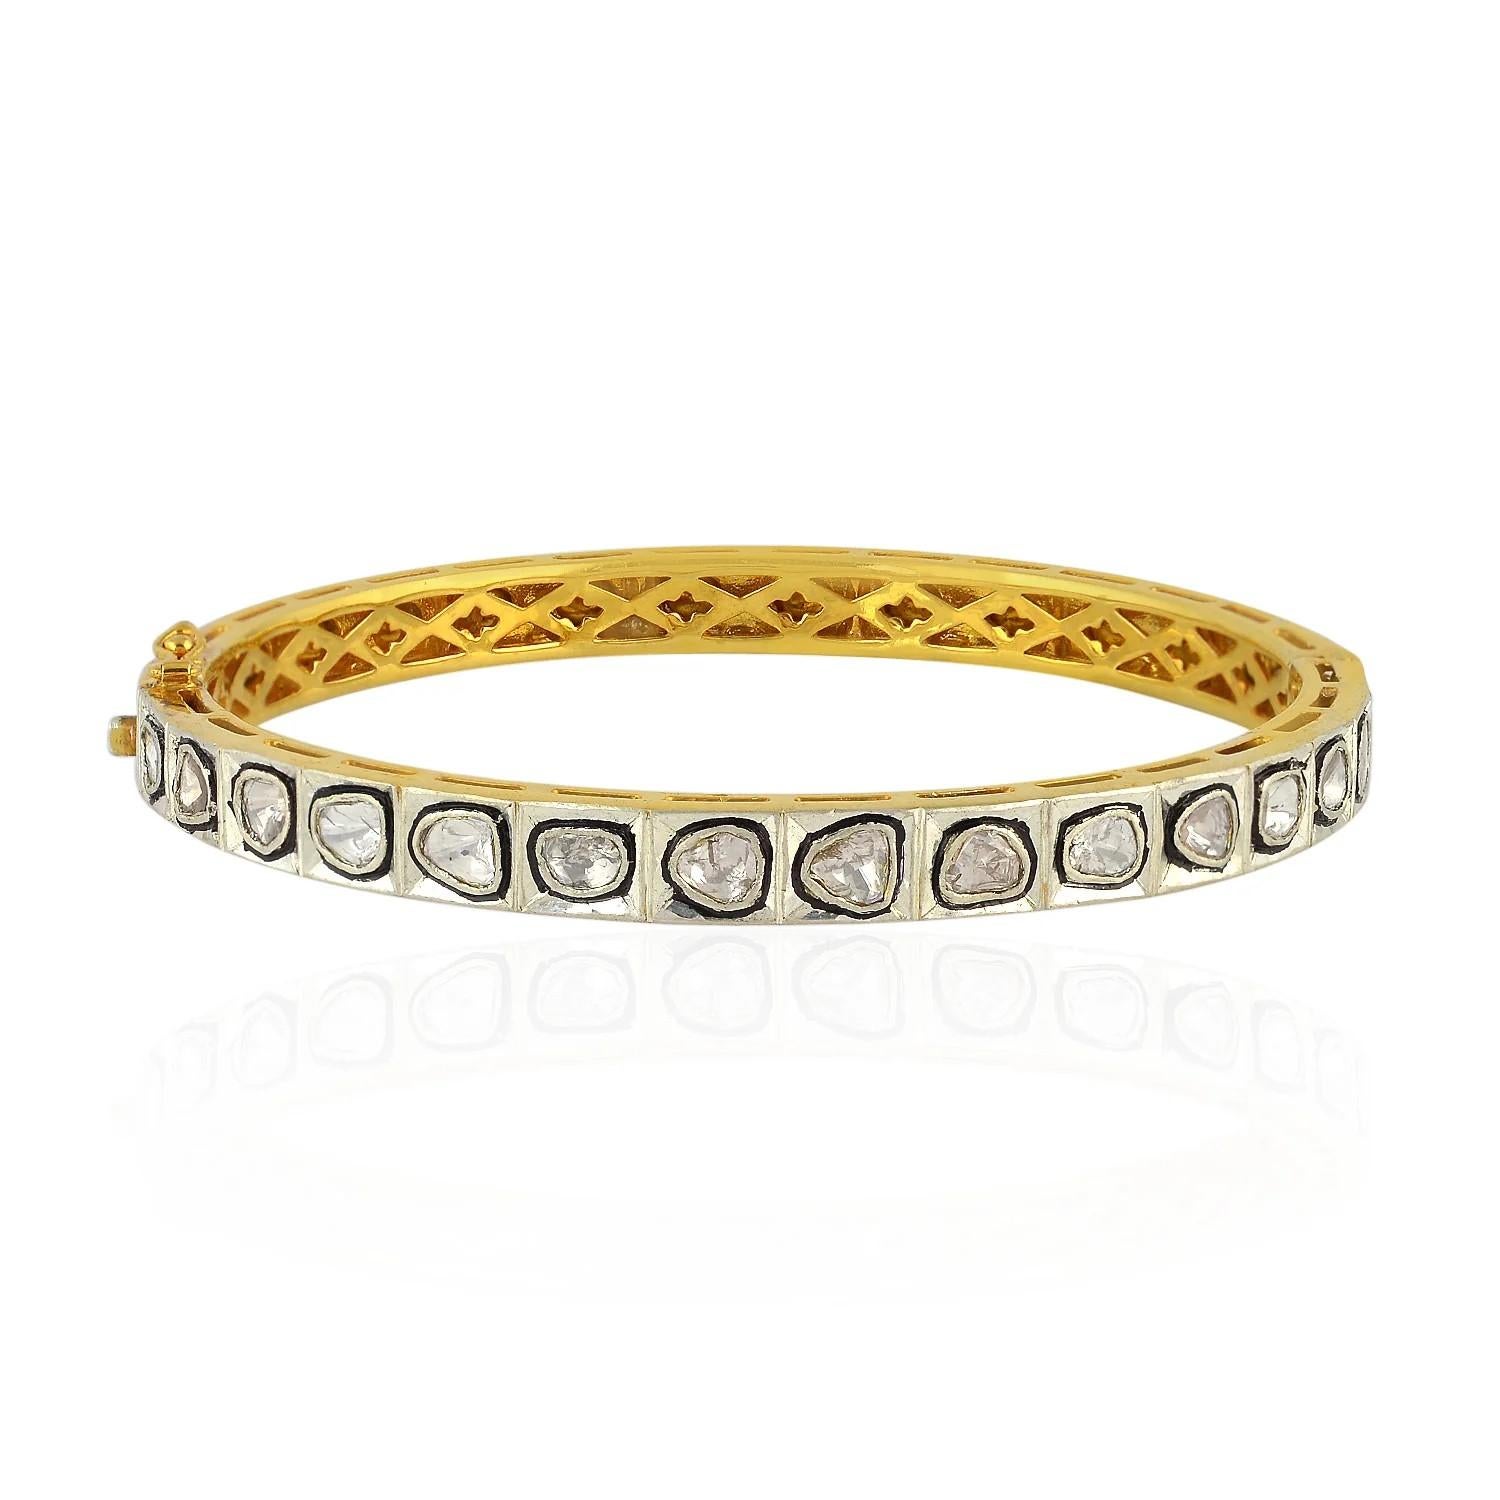 A beautiful bracelet handmade in 14K gold, sterling silver & set in 2.70 carats of rose cut diamonds.

FOLLOW MEGHNA JEWELS storefront to view the latest collection & exclusive pieces. Meghna Jewels is proudly rated as a Top Seller on 1stdibs with 5